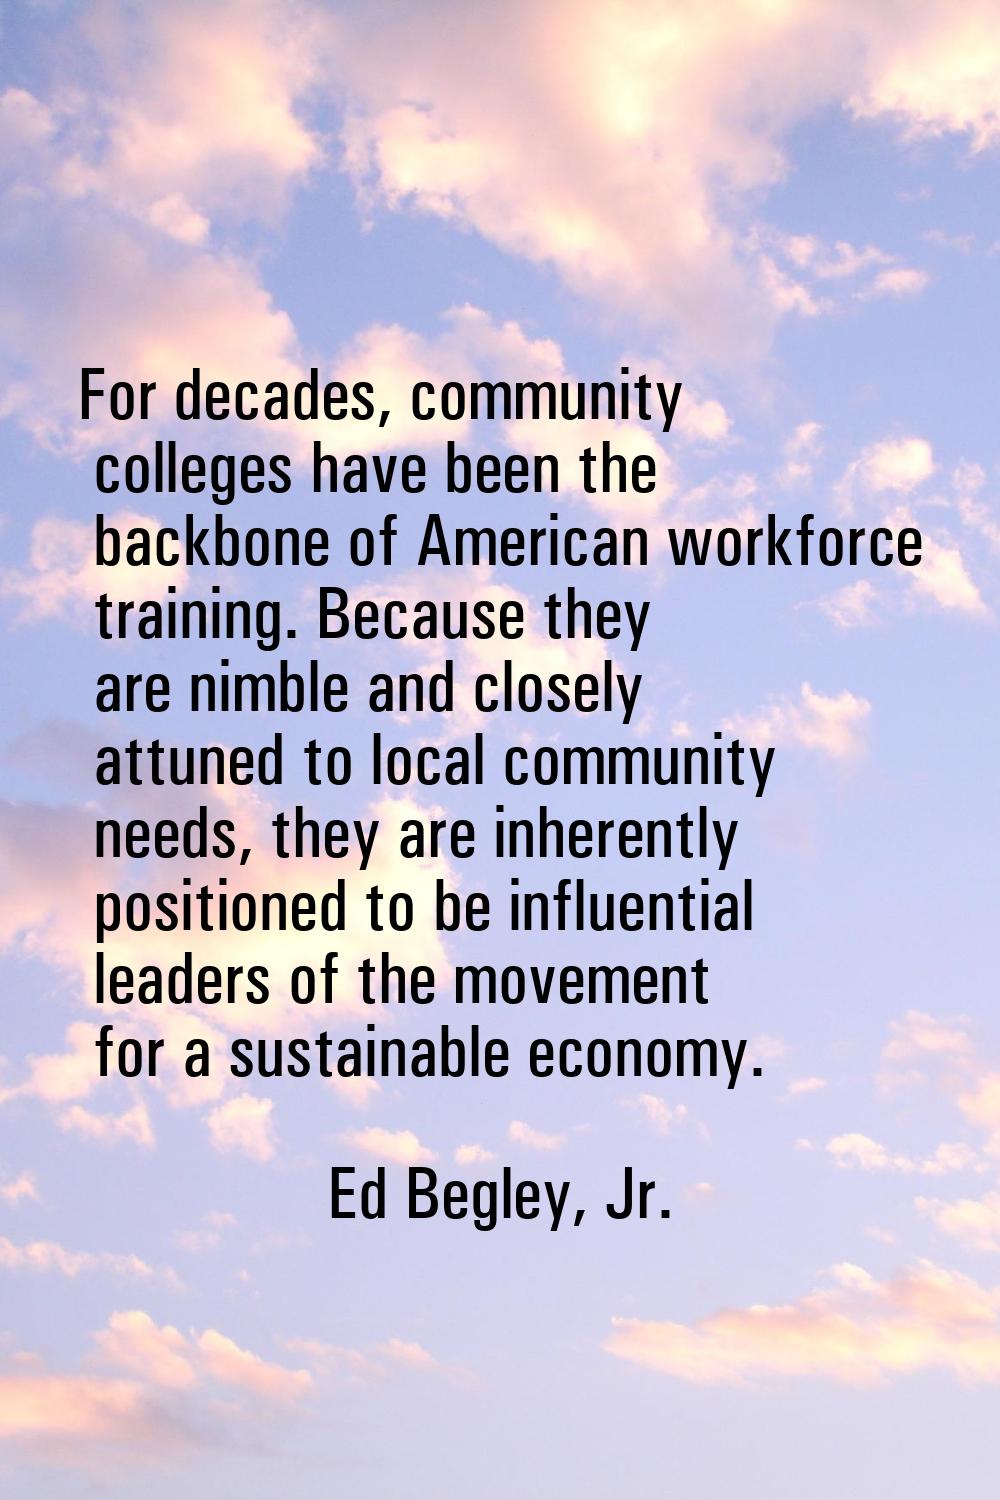 For decades, community colleges have been the backbone of American workforce training. Because they